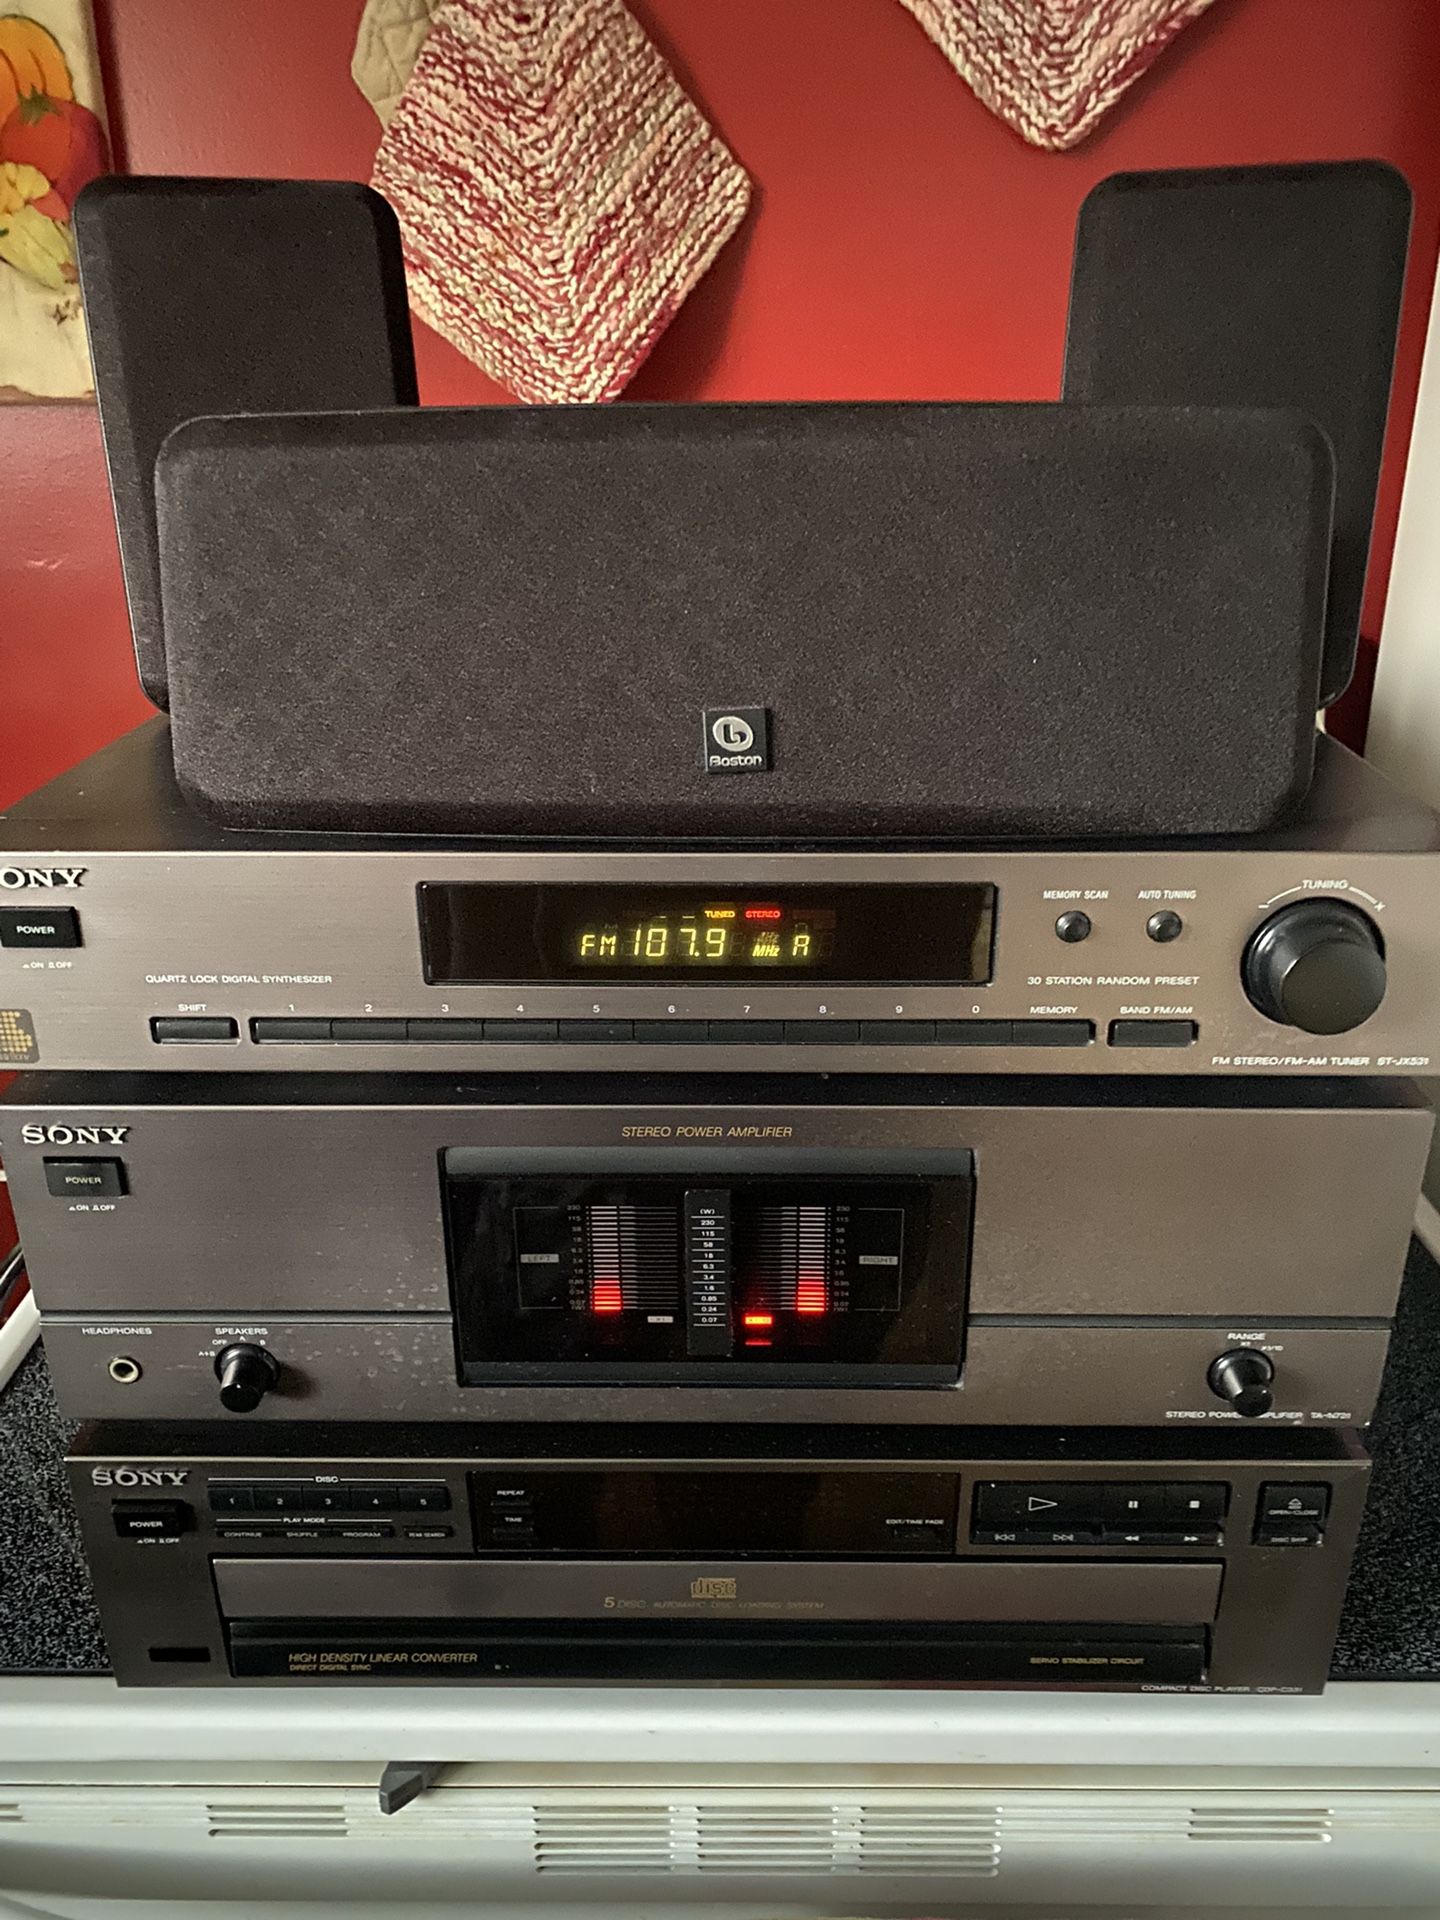 Sony 3pc Stereo System With 5 Disc Cd Changer/ Boston Acoustic Speakers.